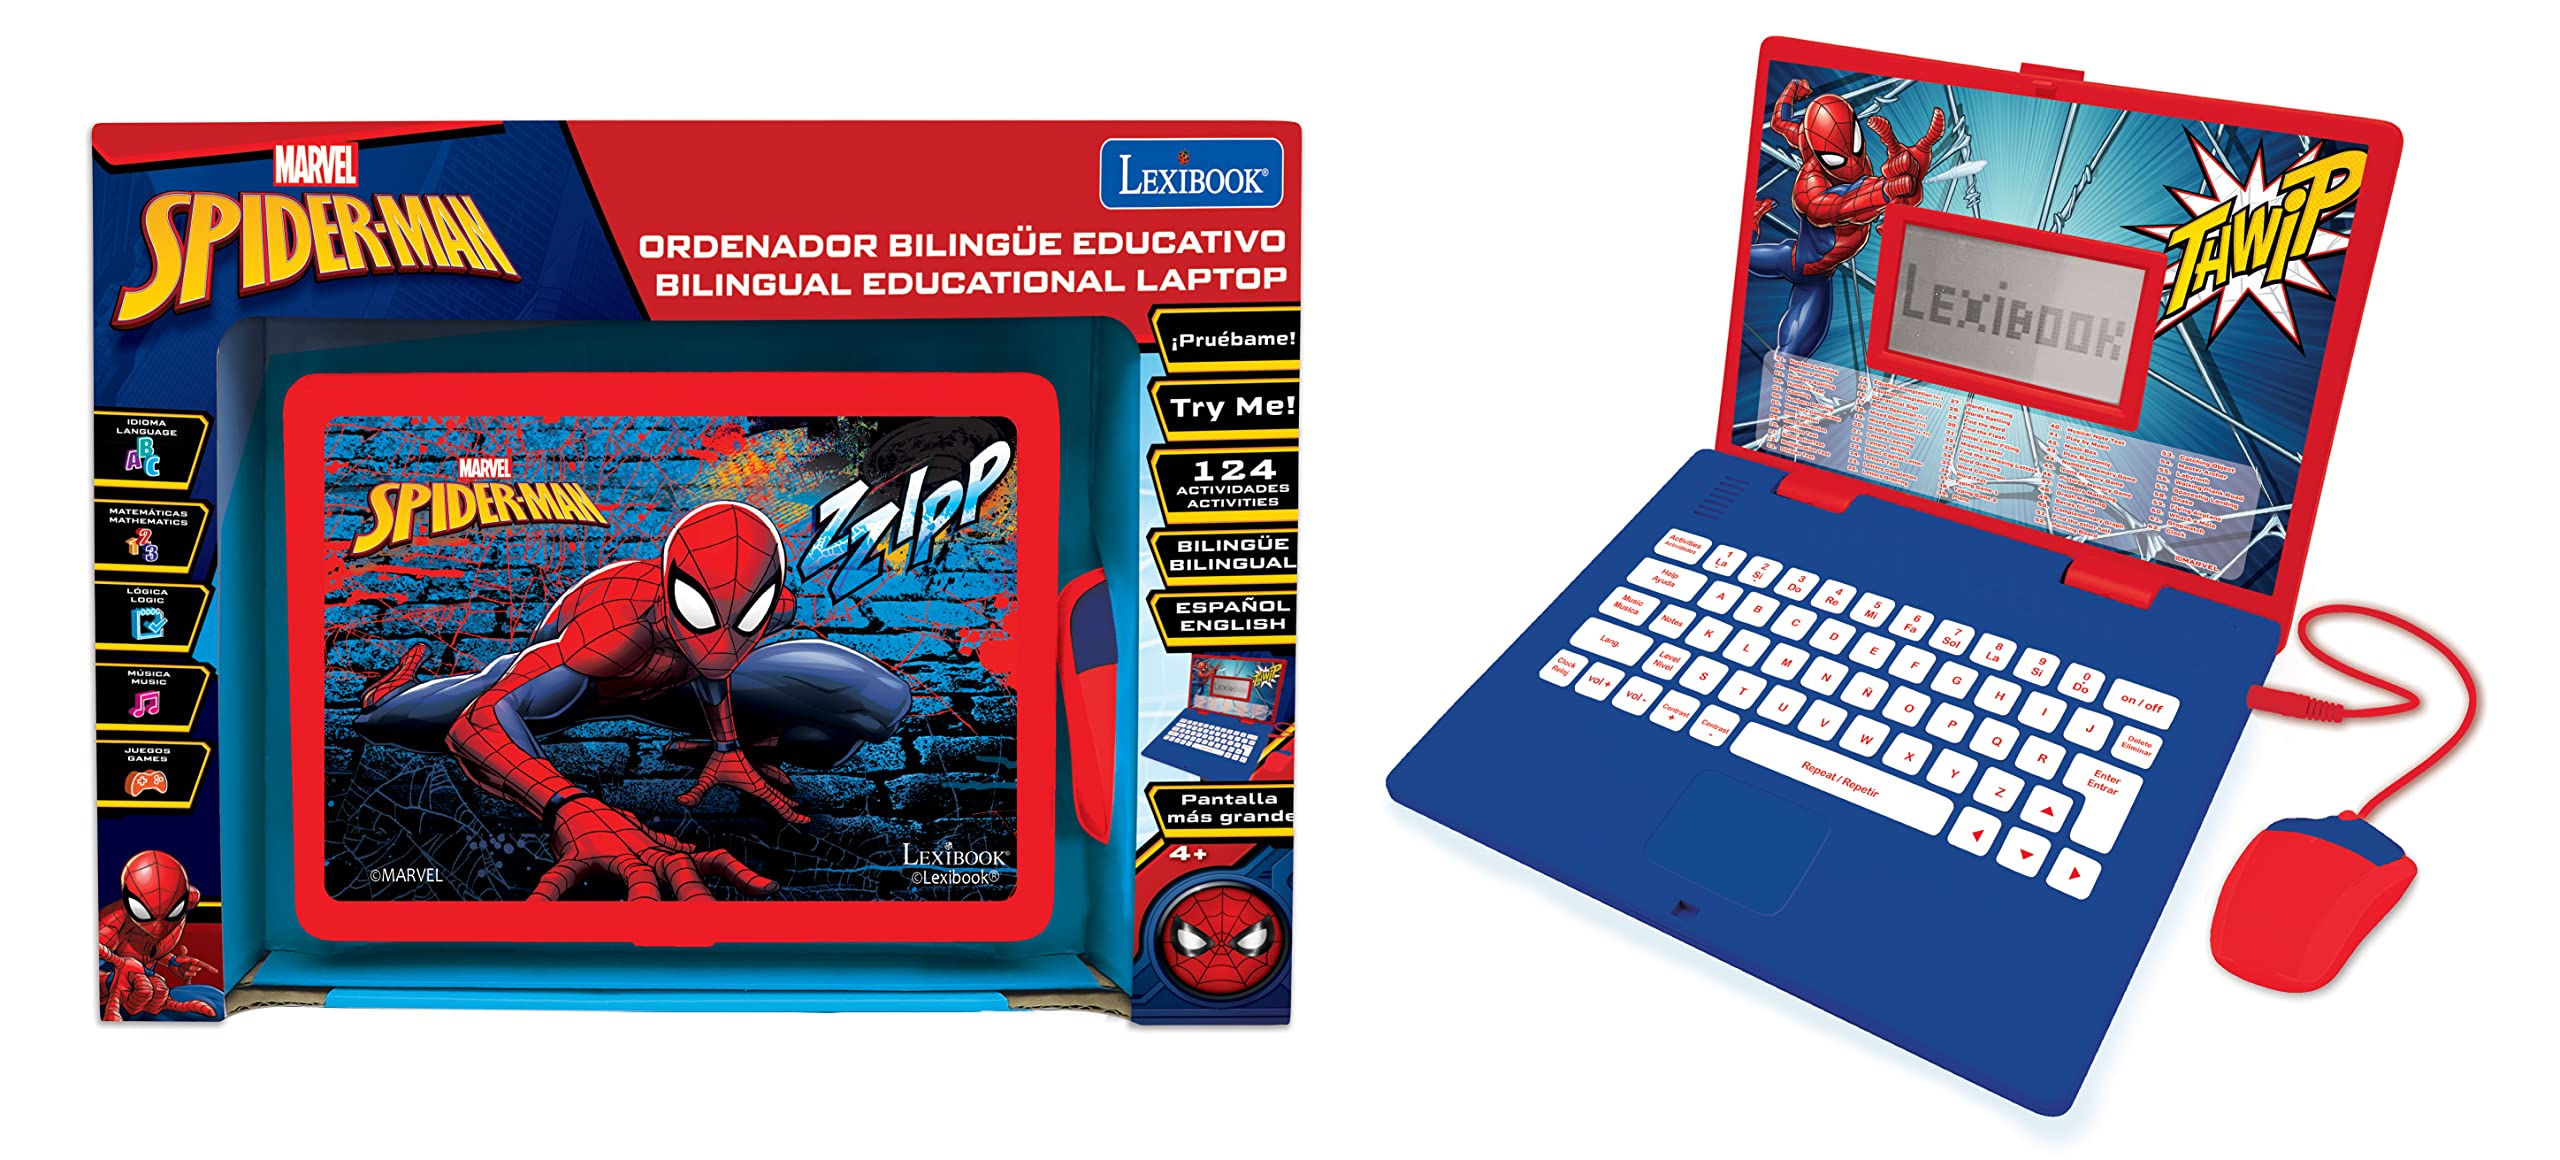 LEXiBOOK Spider-Man - Educational and Bilingual Laptop Spanish/English - Toy for Child Kid (Boys & Girls) 124 Activities, Learn Play Games and Music with Spiderman - Red/Blue JC598SPi2